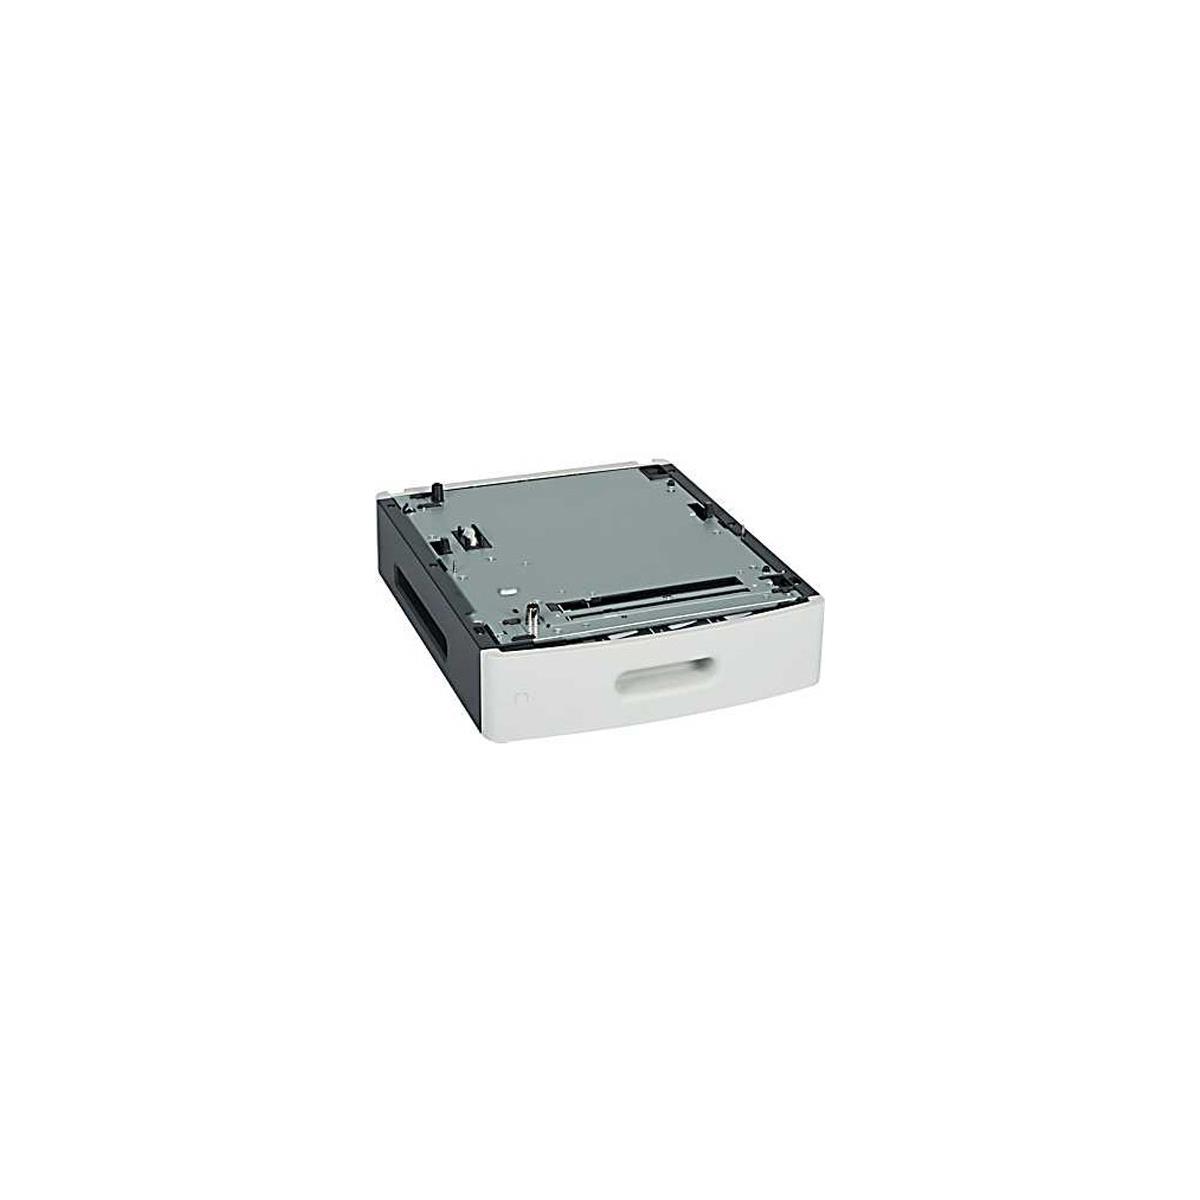 Lexmark 550-Sheet Tray for MS810/MS811/MS812/MX710/MX711 Series Printers -  40G0802